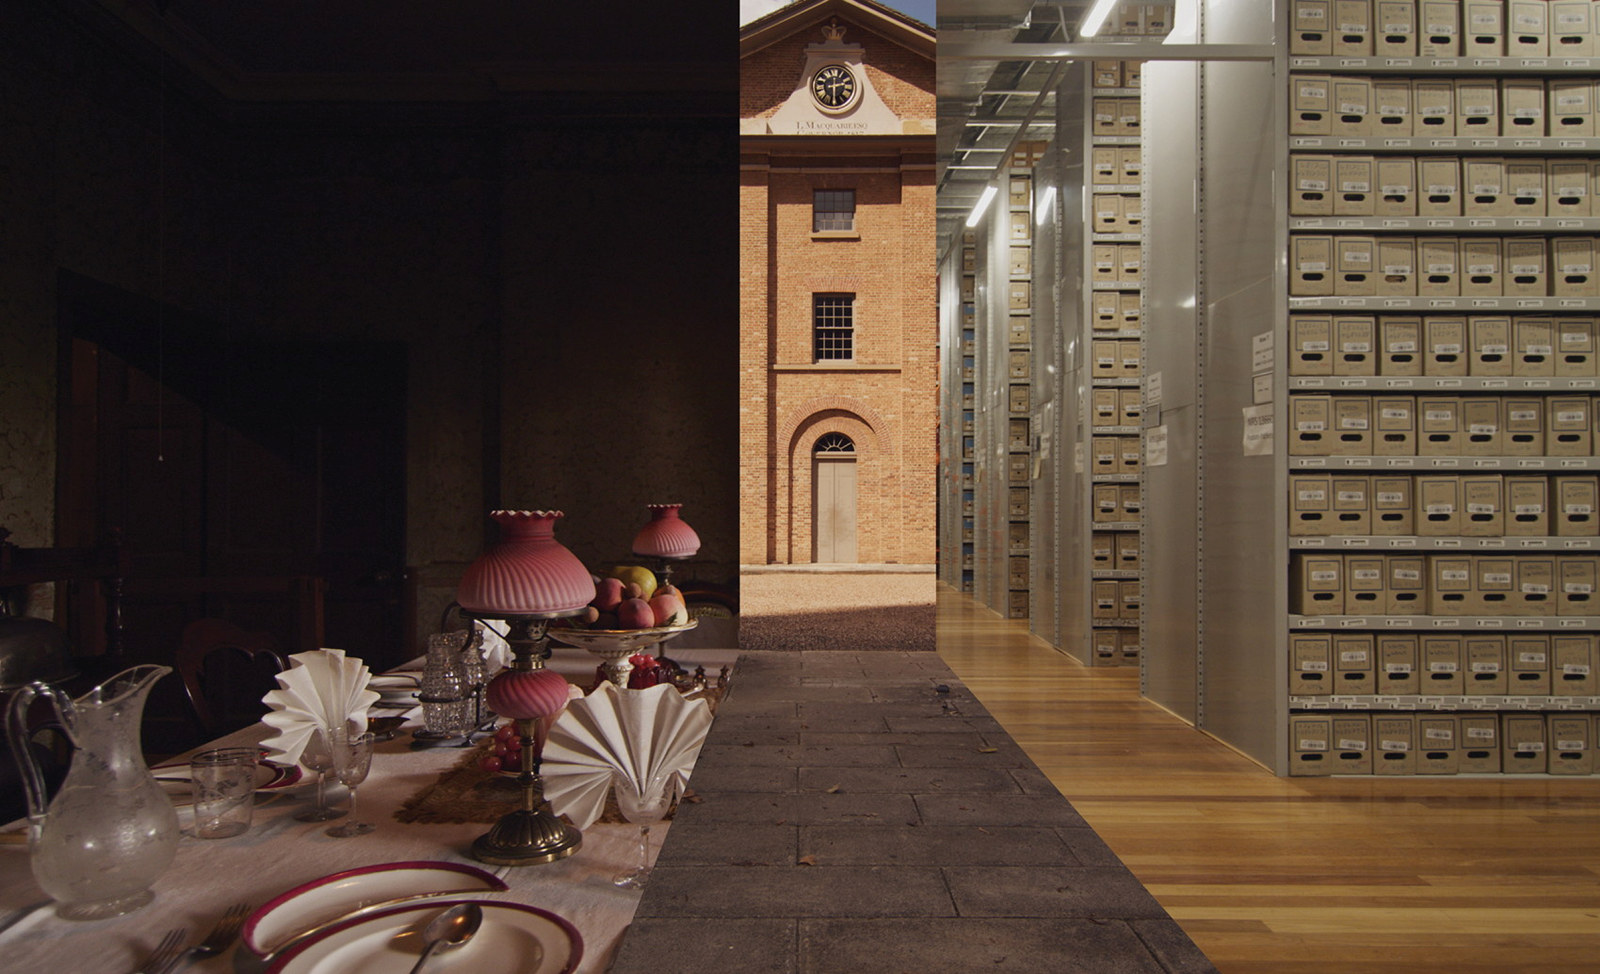 Still from Boundary Conditions, Daniel Crooks, 2022. Presented by Sydney Living Museums.